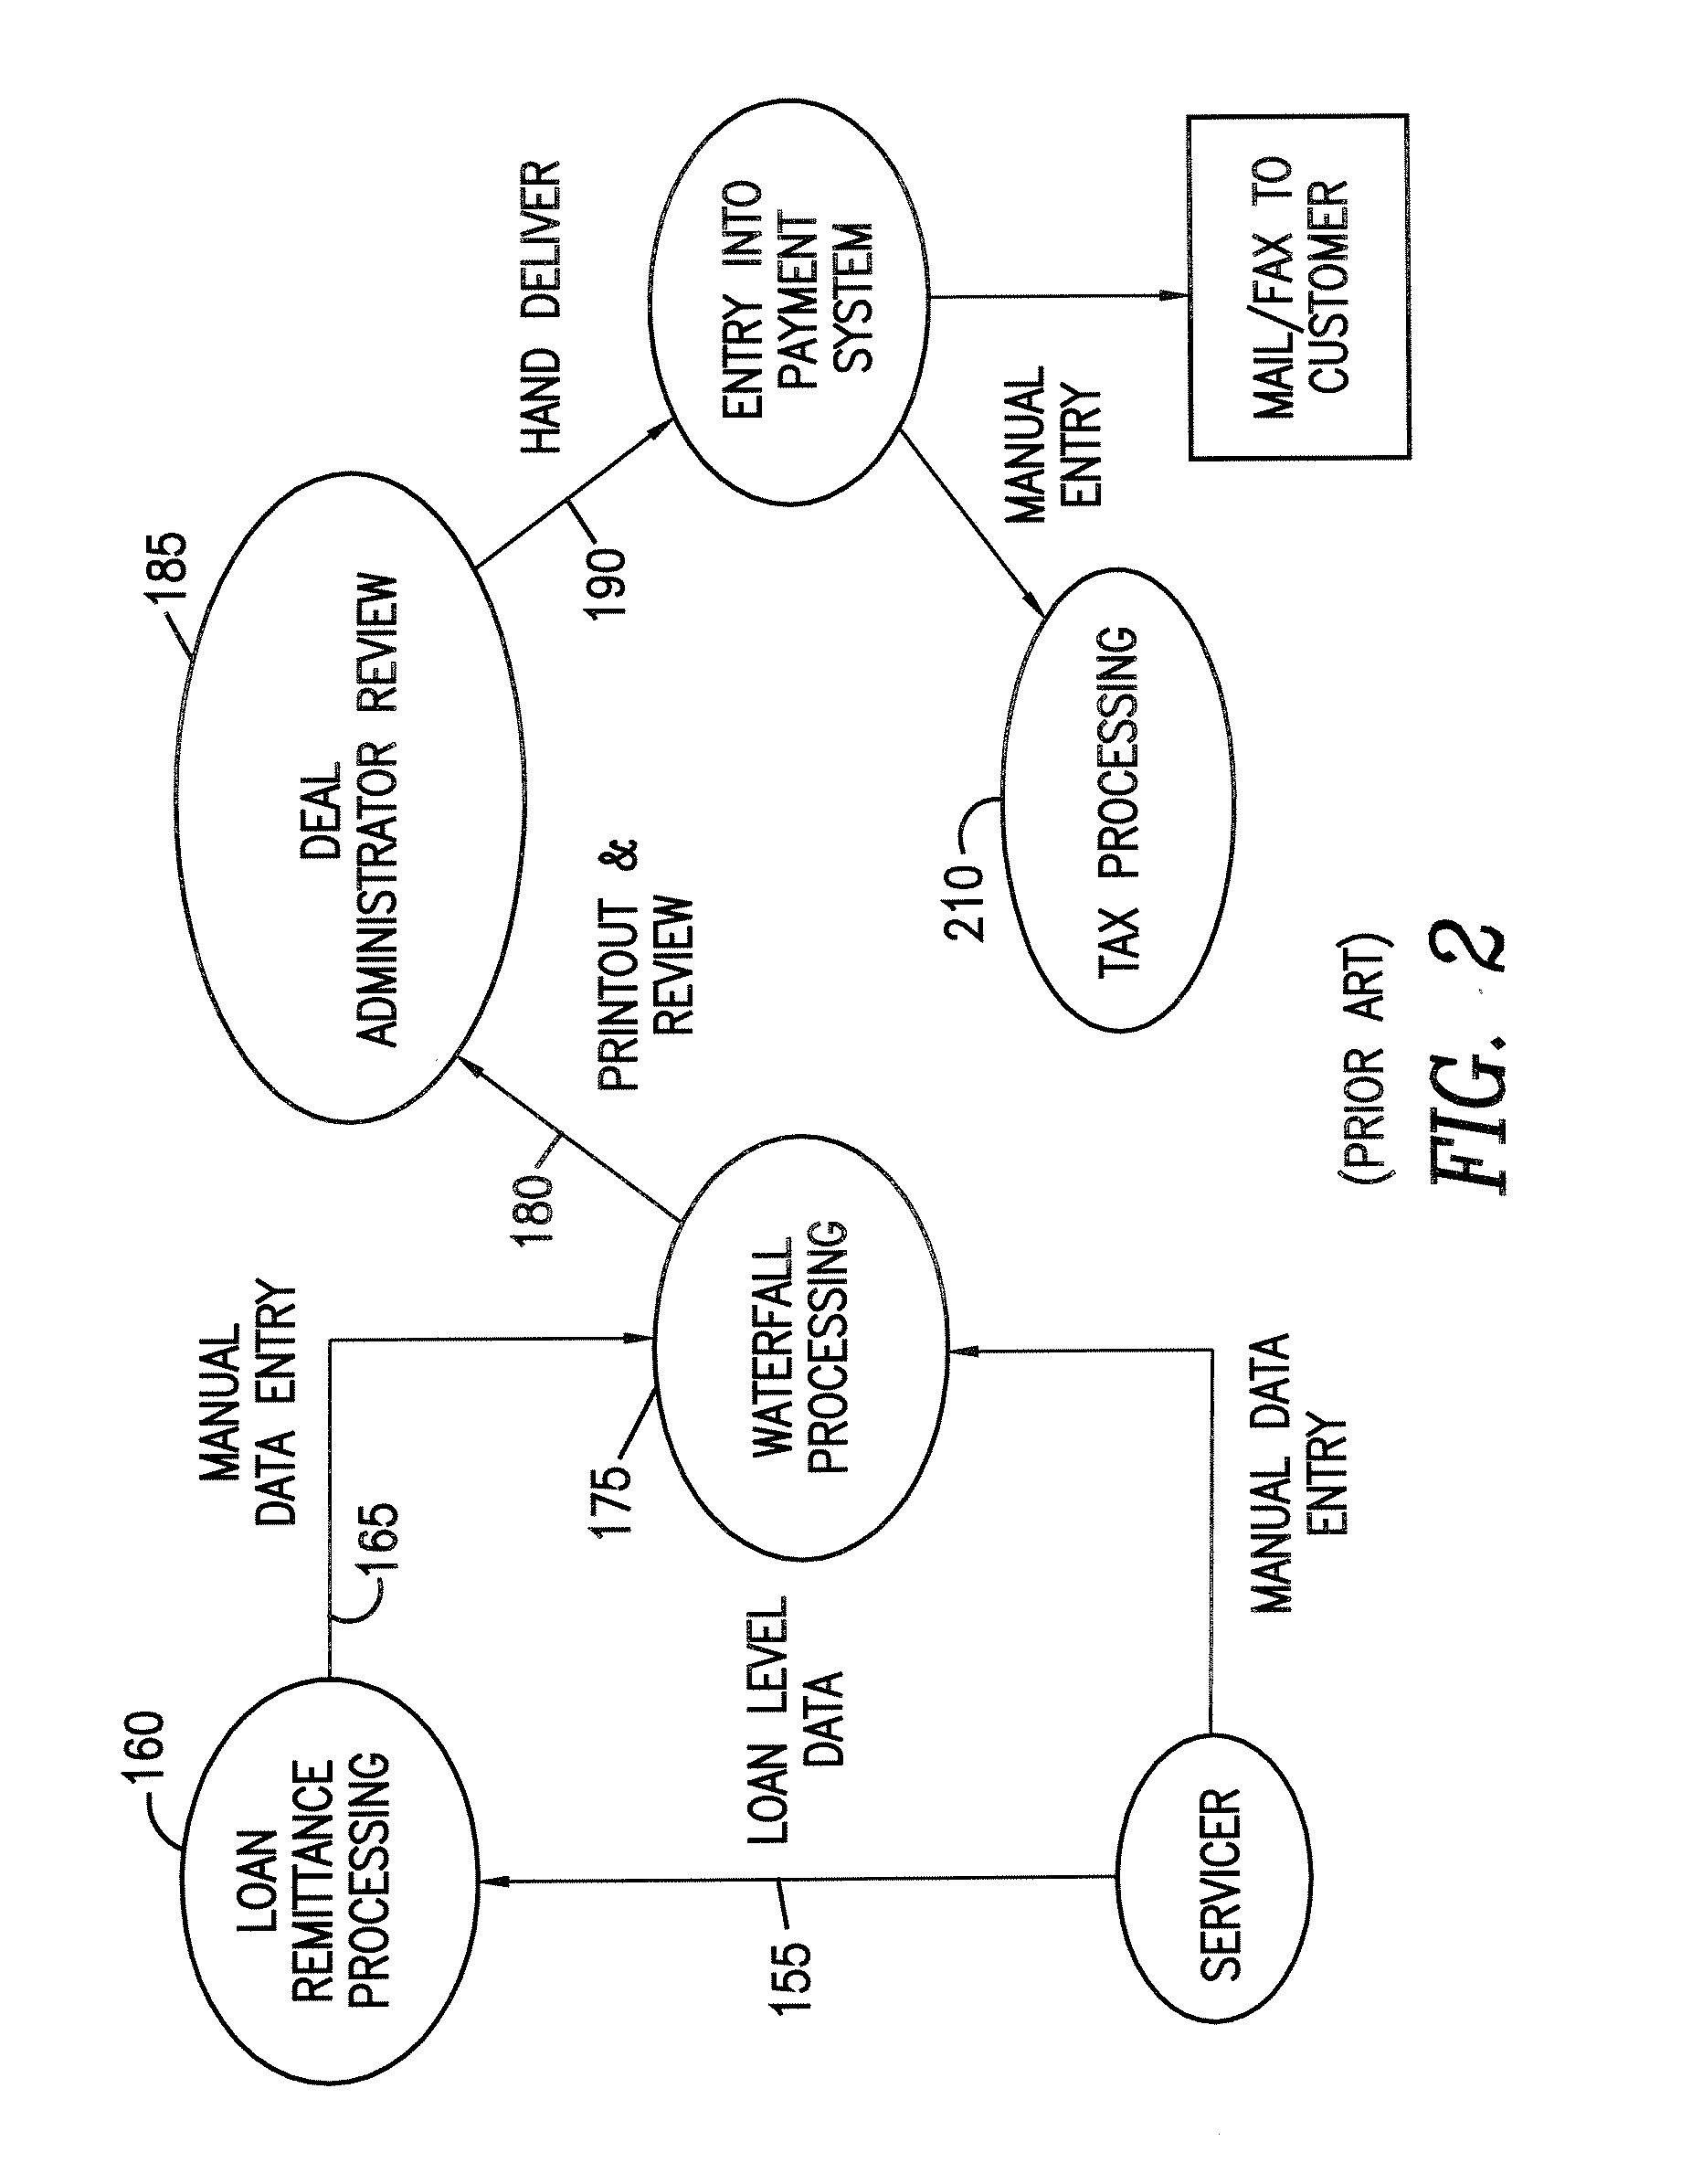 Workflow management system and method